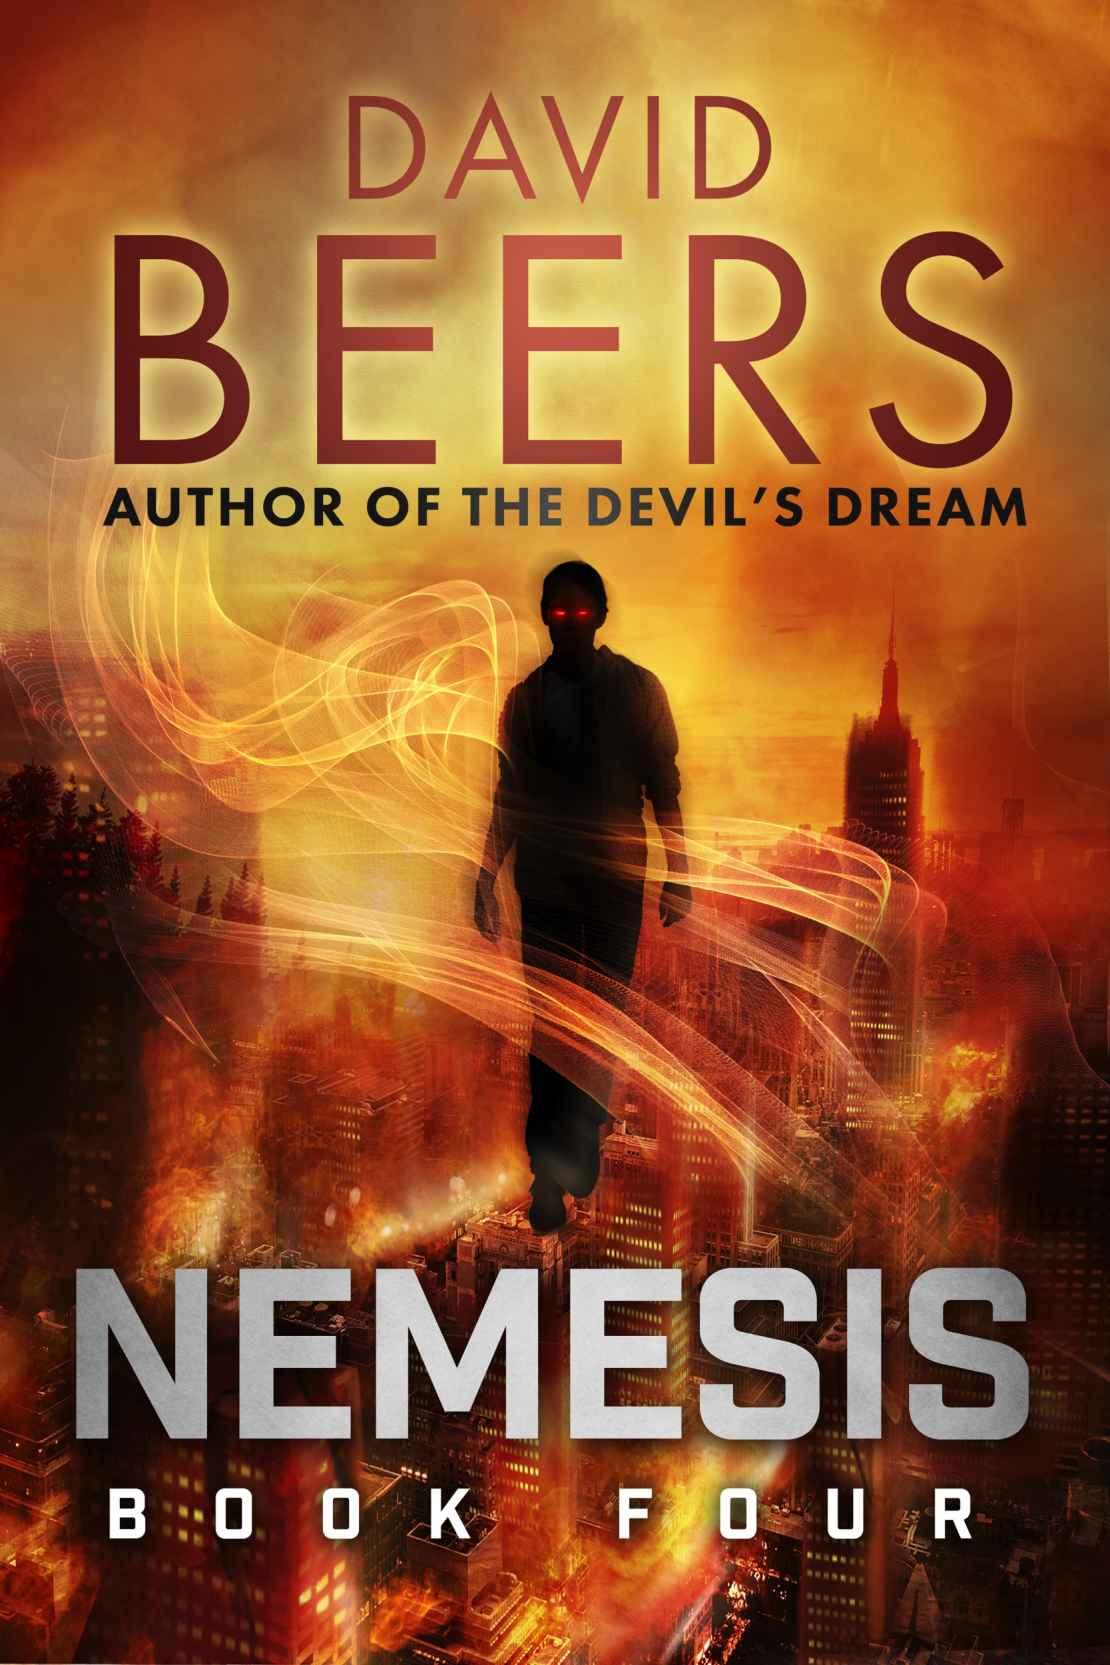 Nemesis: Book Four by David  Beers